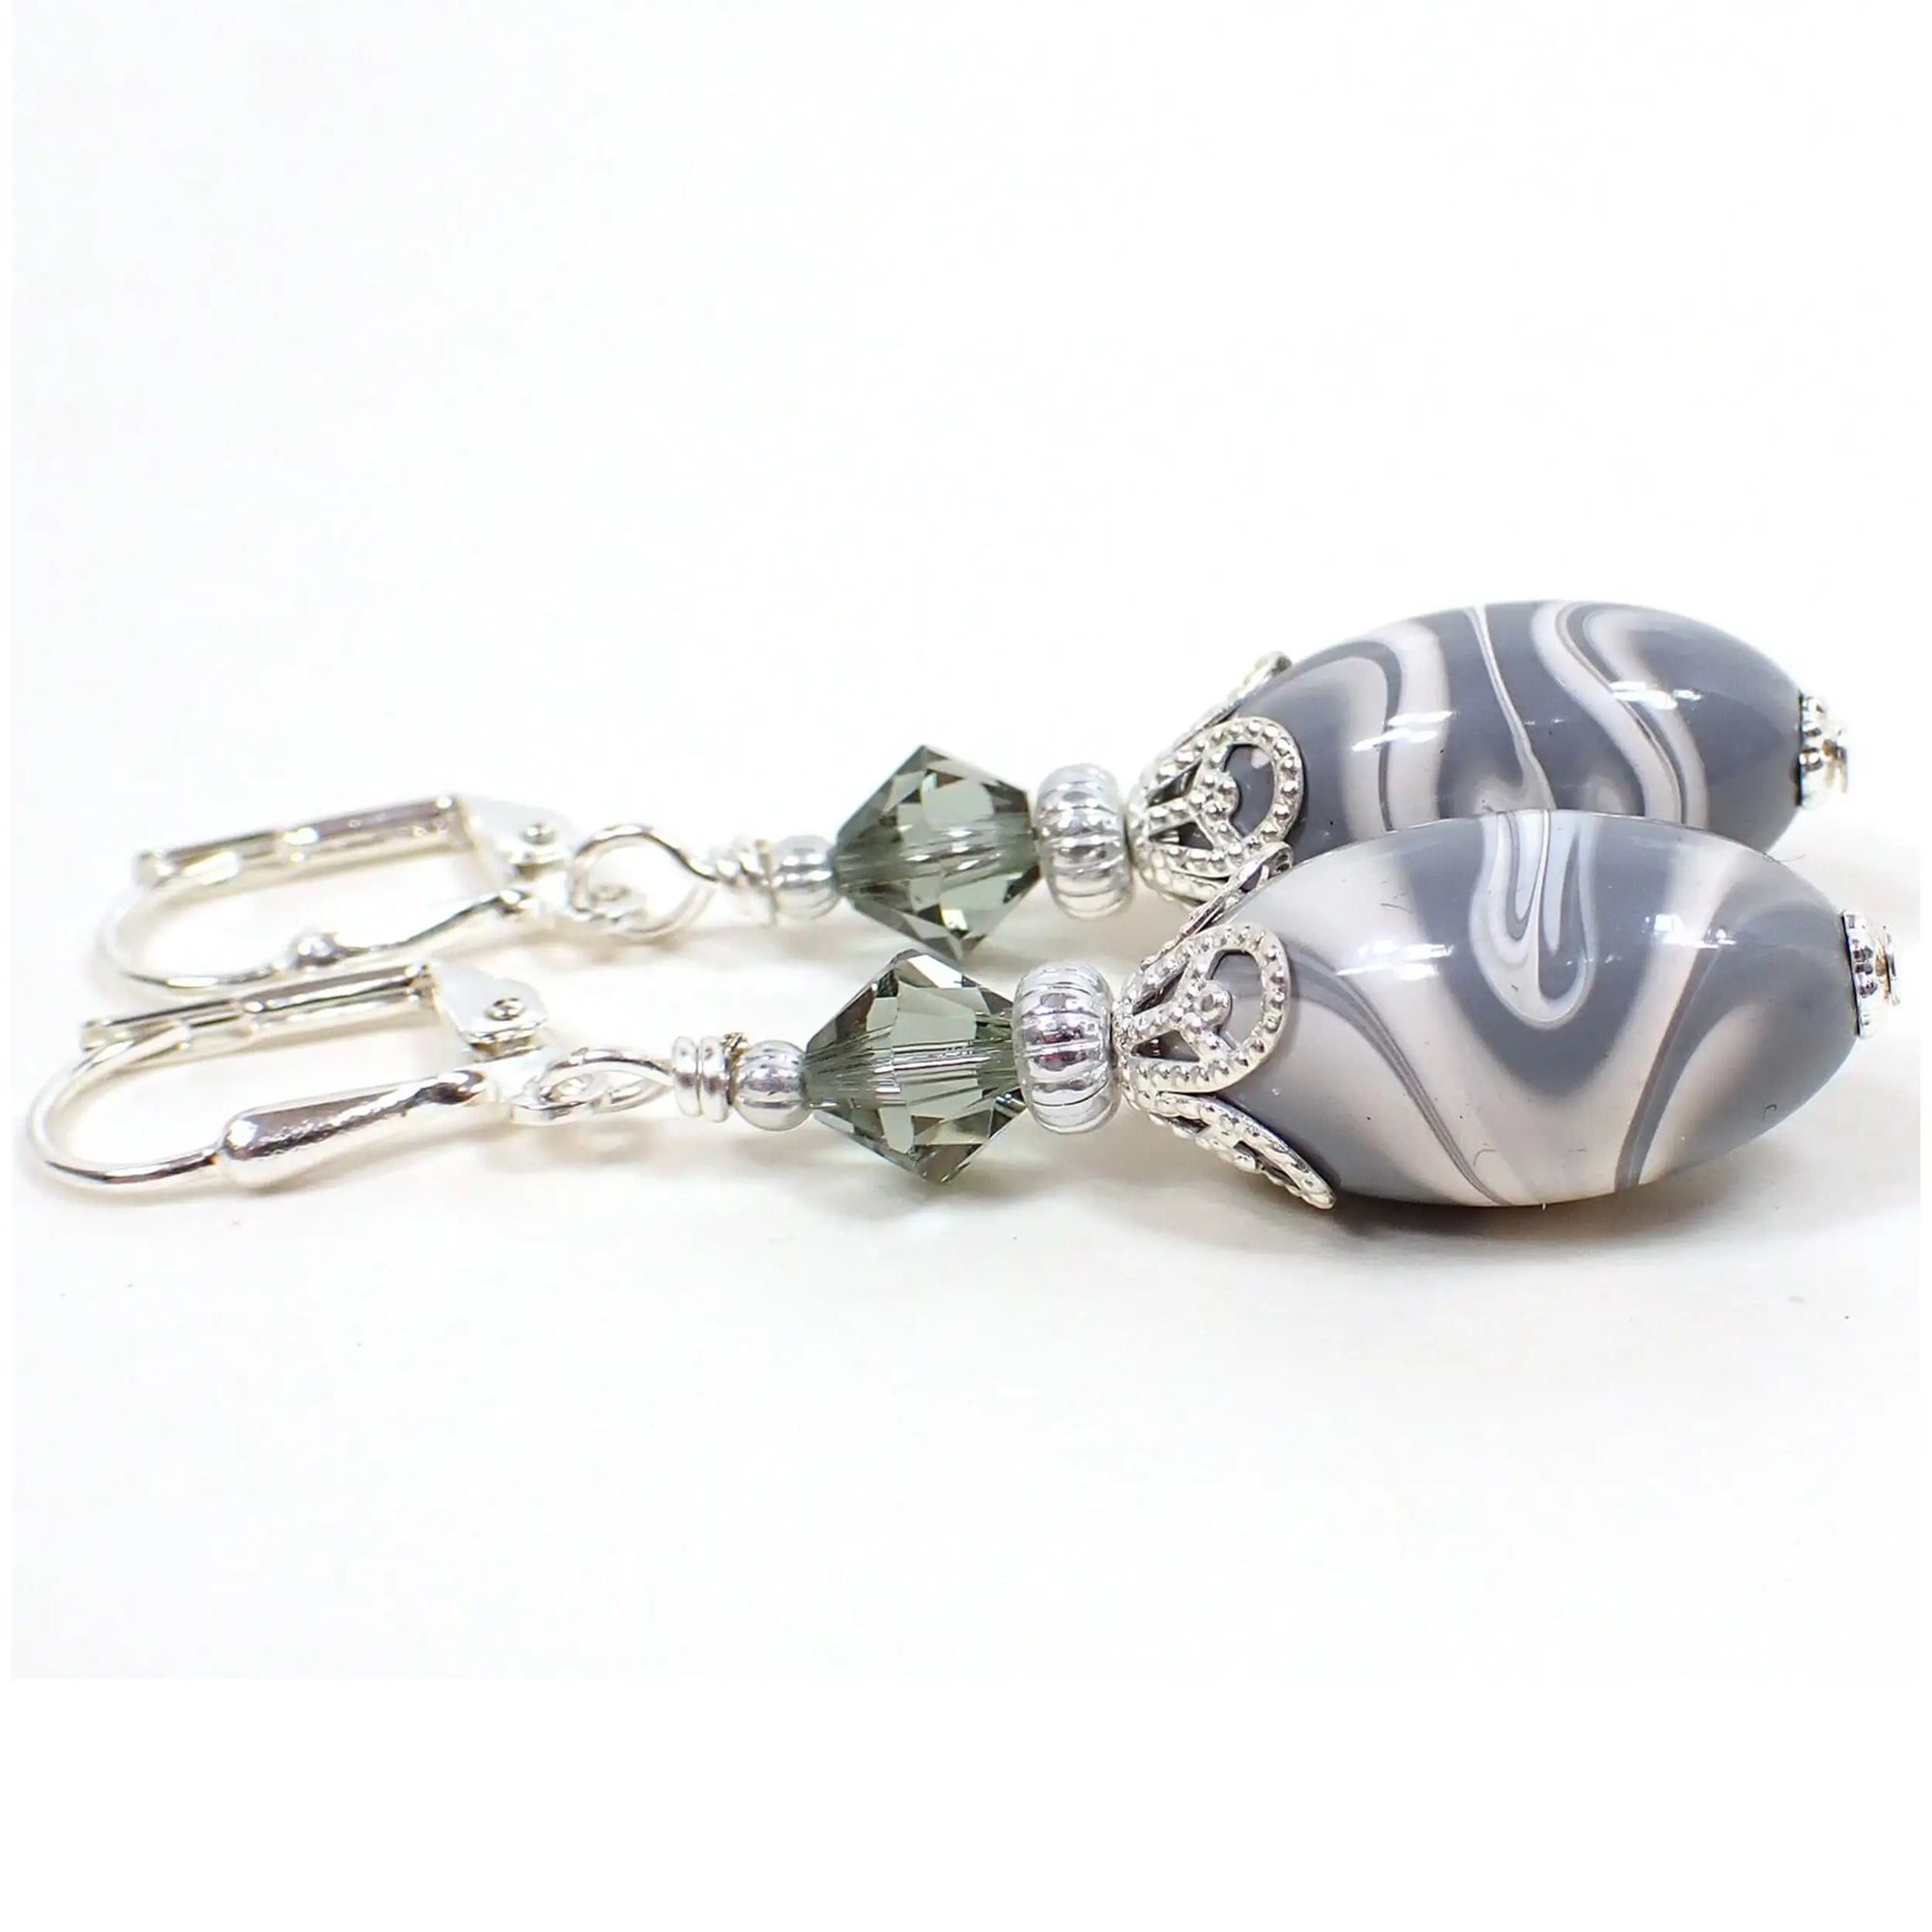 Side view of the handmade earrings with vintage lucite beads. The metal is silver plated in color. There are faceted glass crystal beads in smoky gray at the top. The bottom lucite beads have marbled swirls of bluish gray and white. Each bottom bead is different in pattern from the other for a unique appearance.